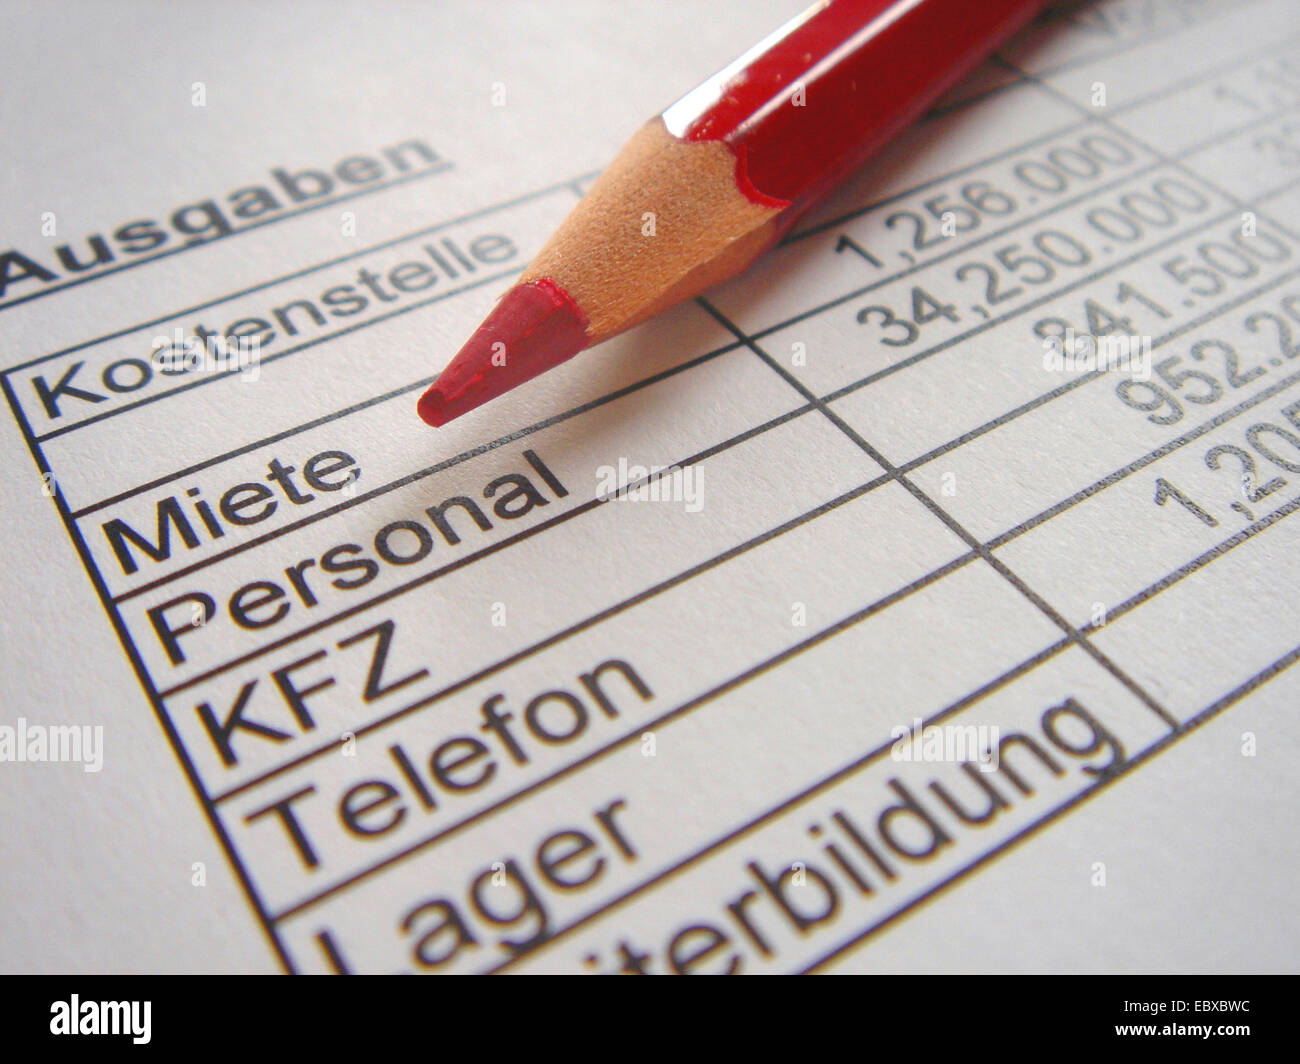 red pencil lying on a balance sheet of firm expenses Stock Photo